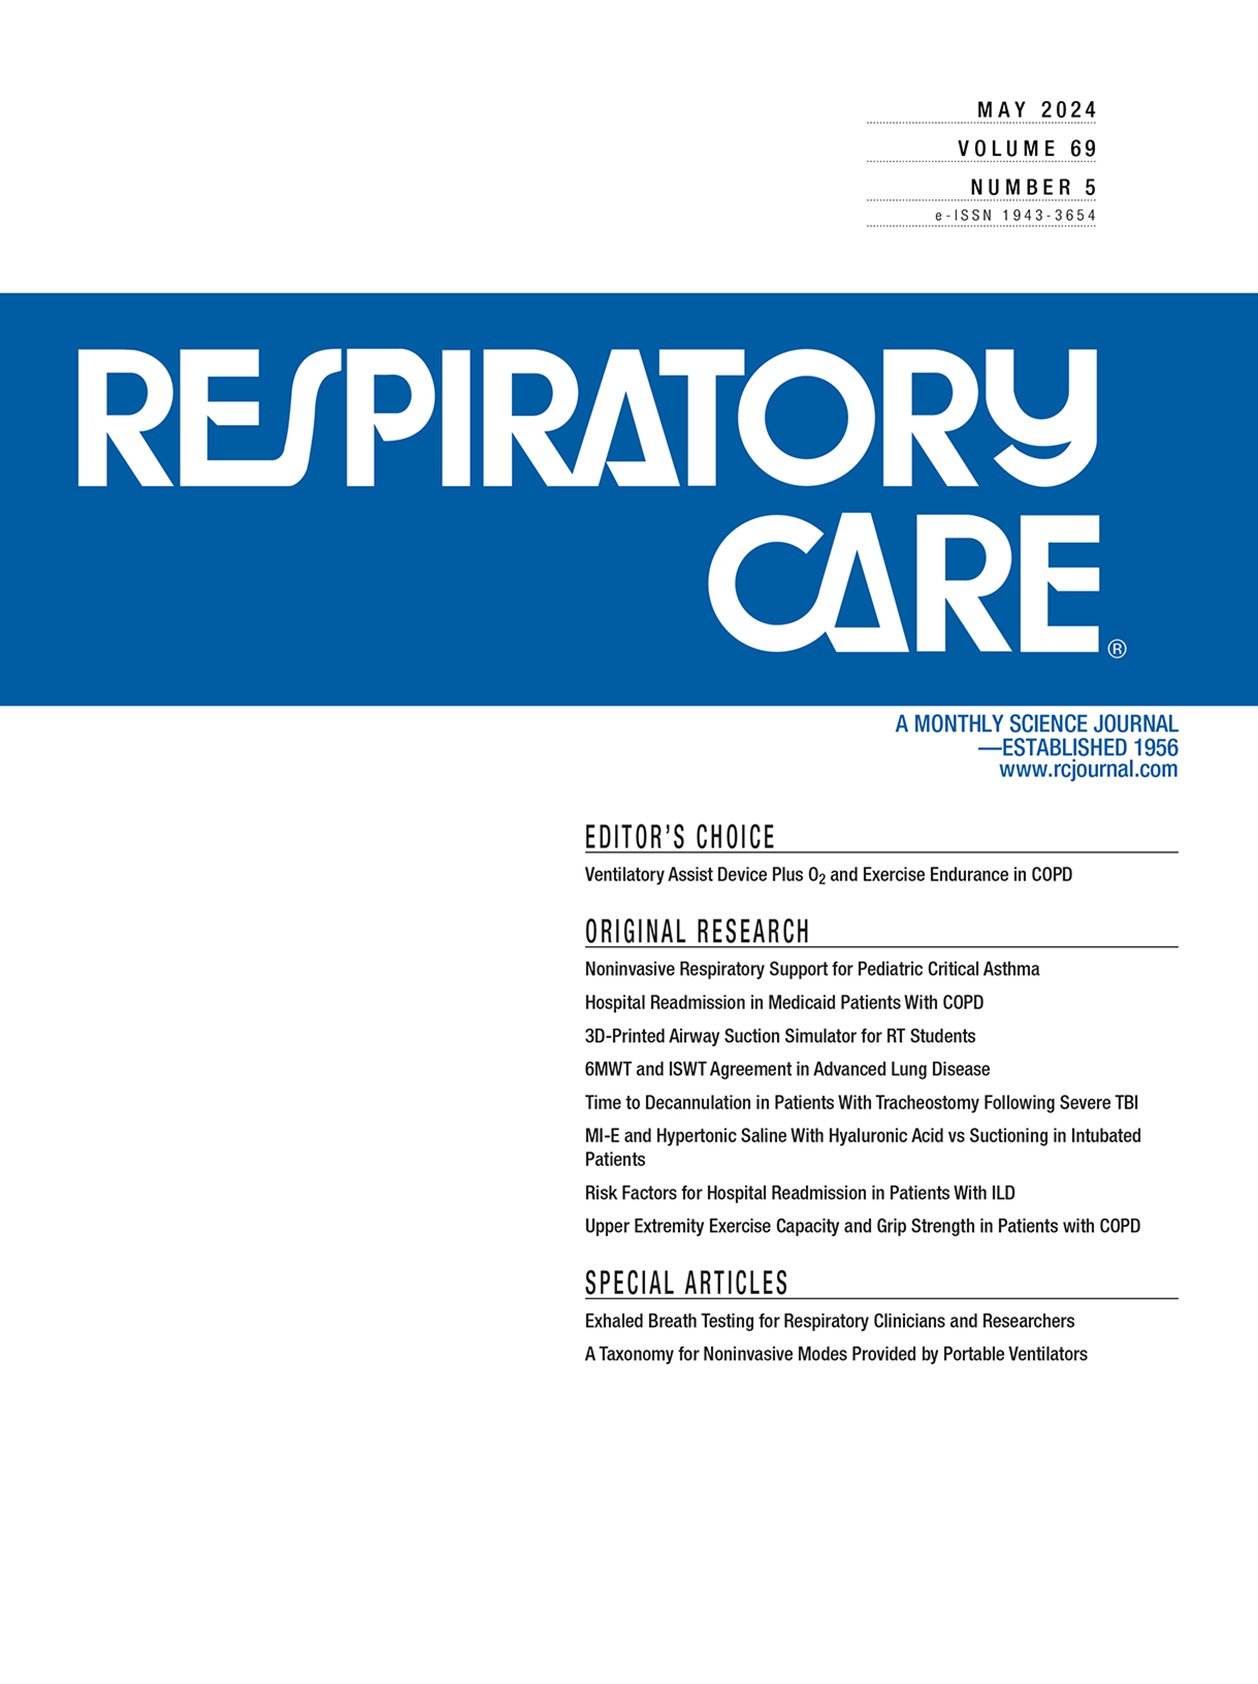 Noninvasive Respiratory Support for Pediatric Critical Asthma: A Multicenter Cohort Study